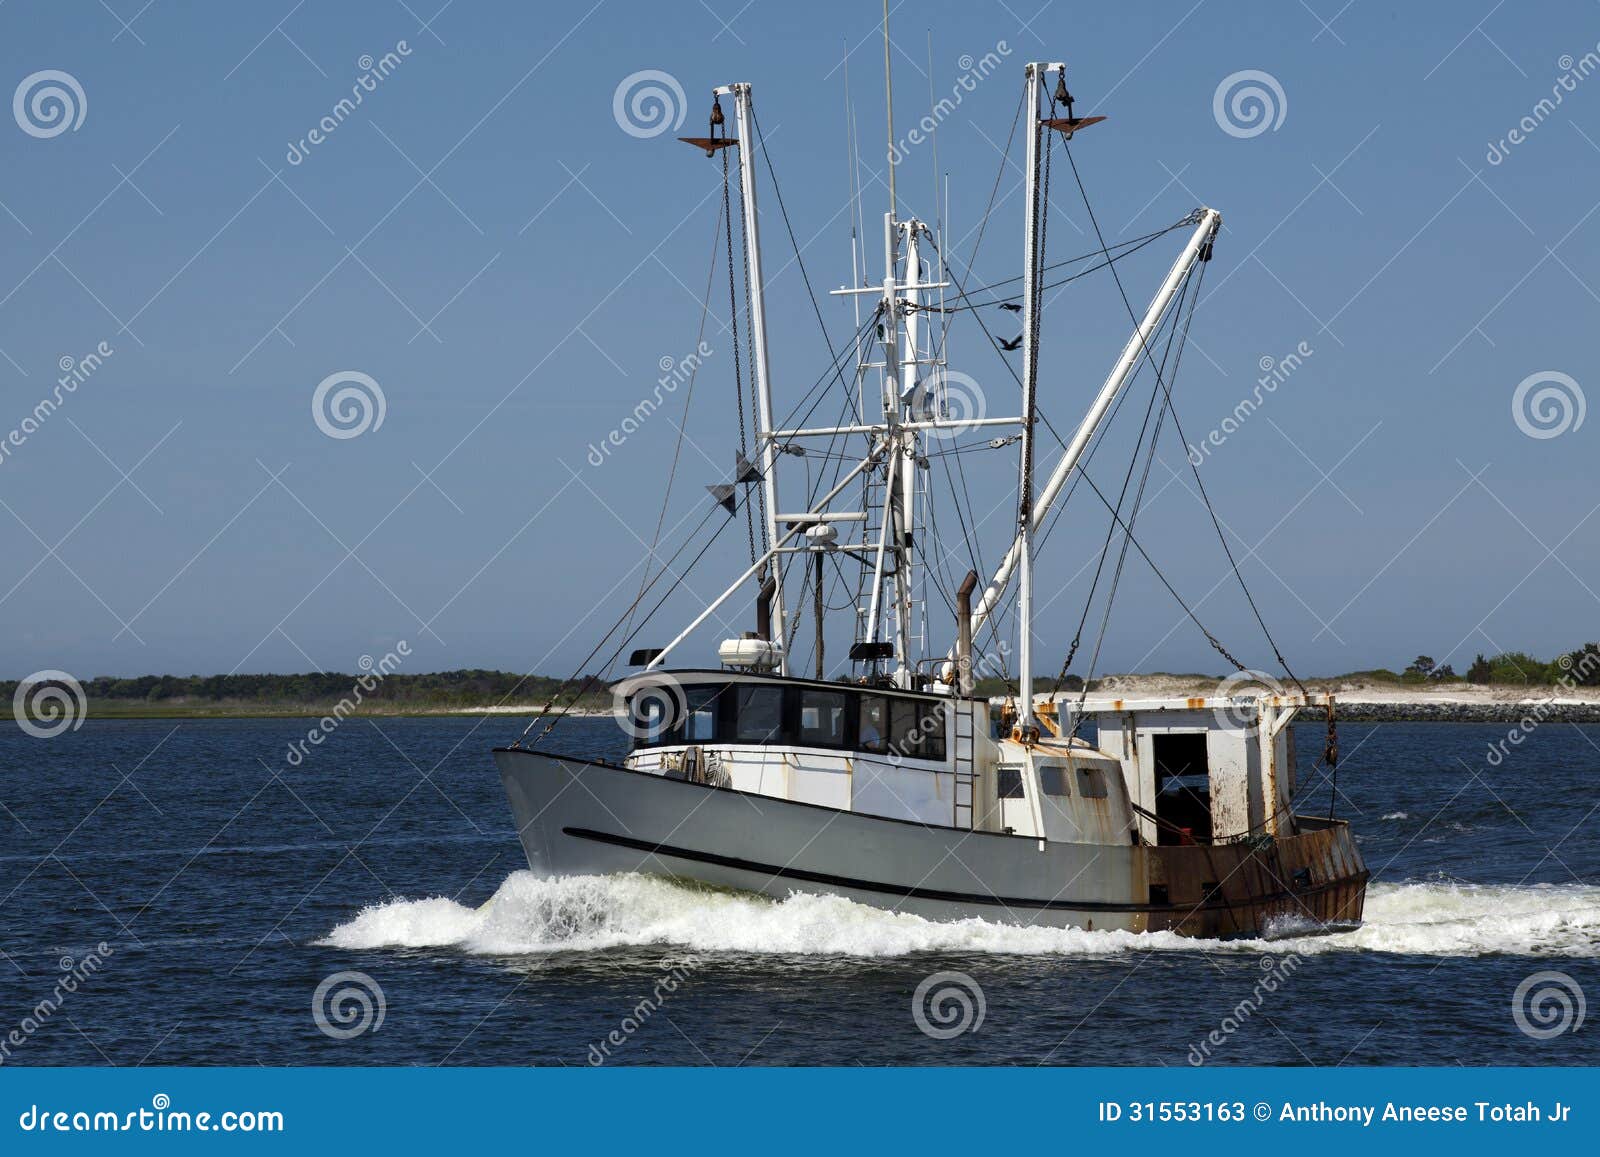 Commercial Fishing Boat Stock Photos - Image: 31553163